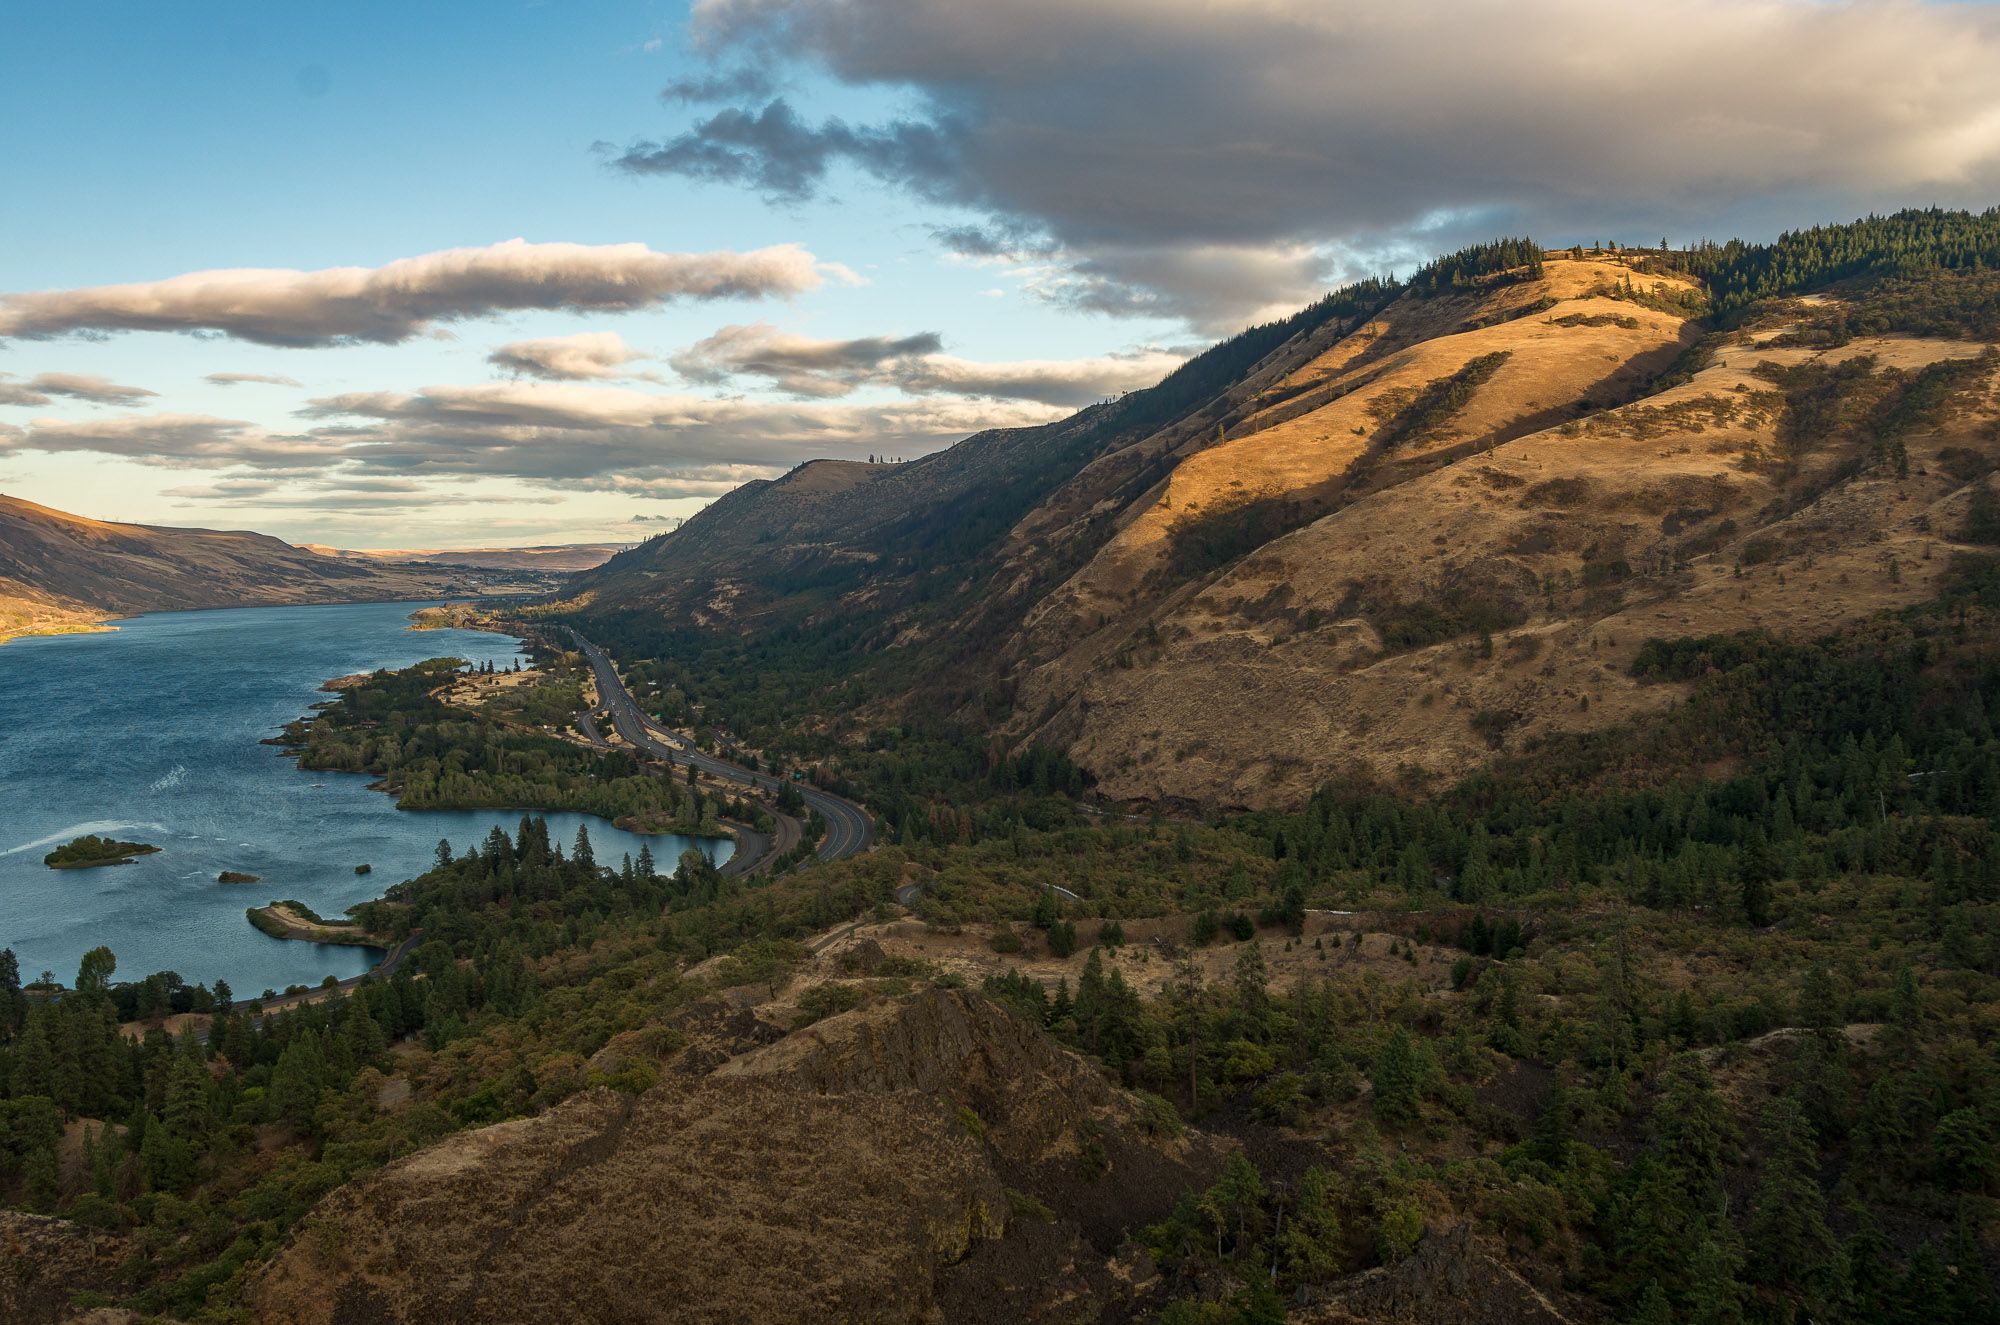 Rowena Crest viewpoint